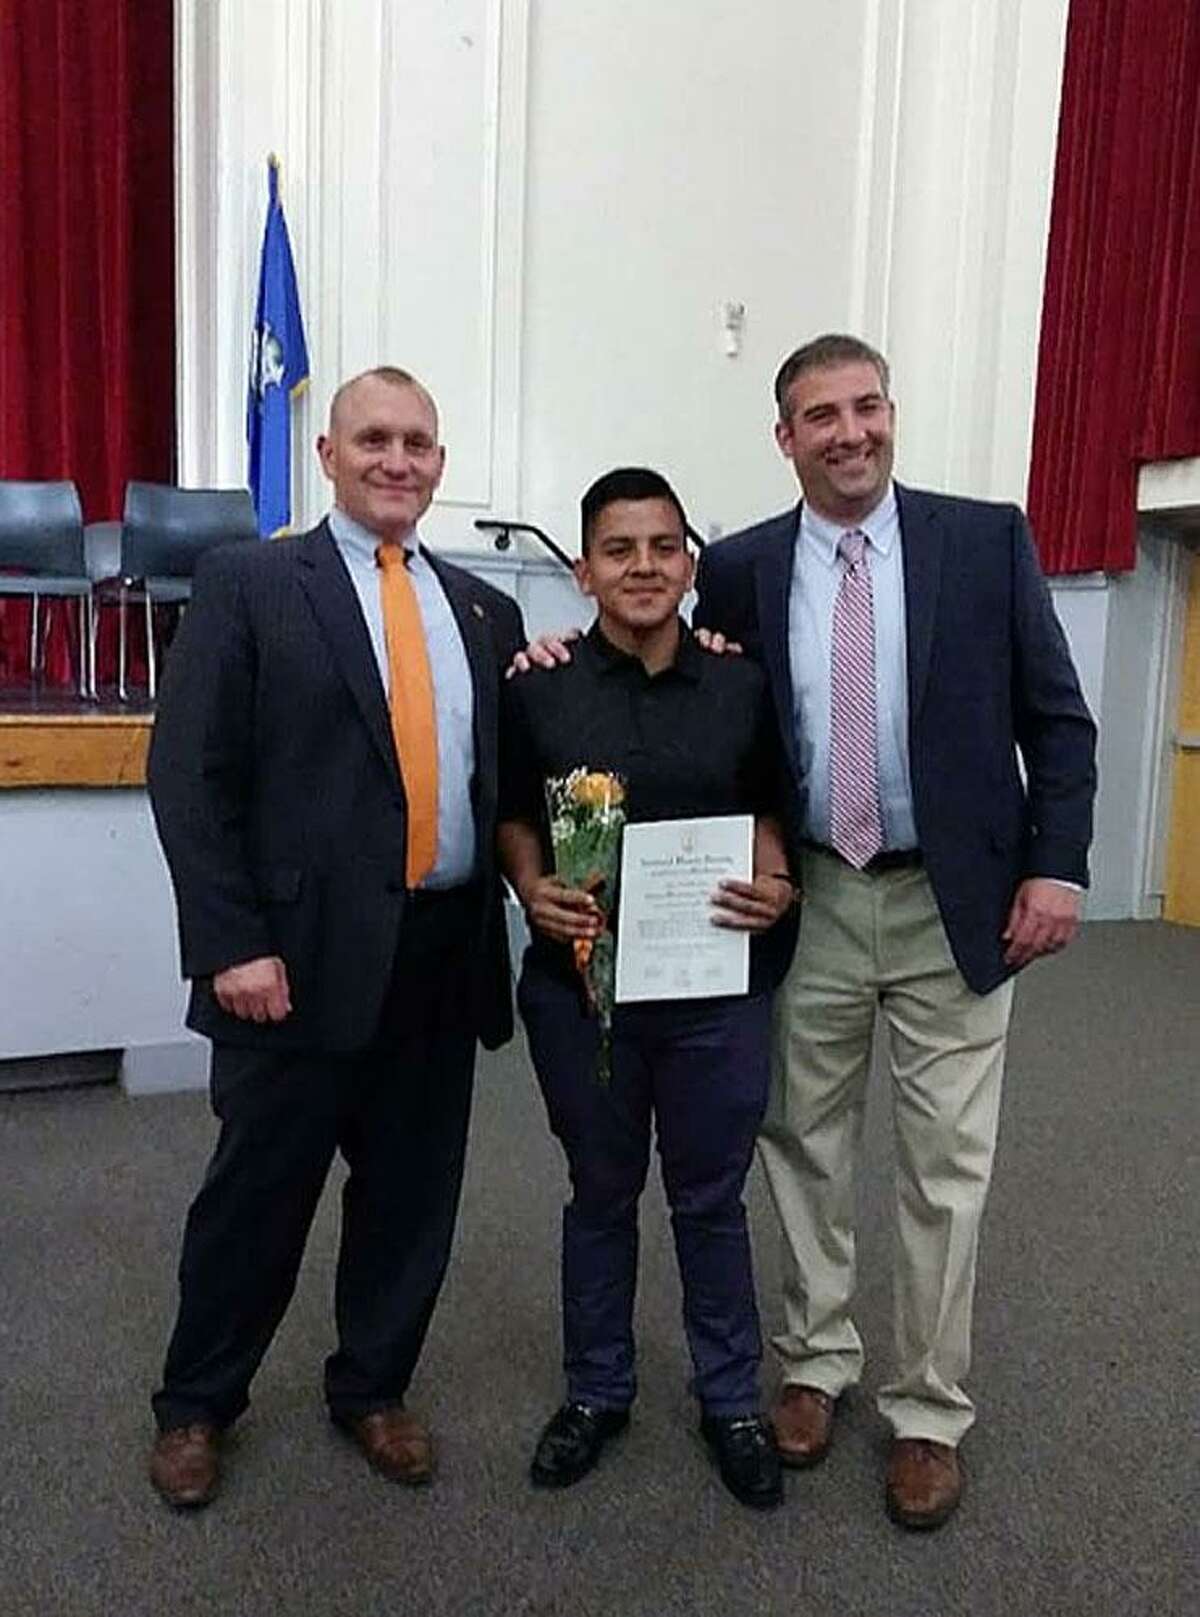 Erwin Hernandez, center, is recognized by Stamford High Principal Ray Manka, left, and Assistant Principal Matt Forker after being inducted into the National Honor Society. Hernandez had his leg amputated after an accident last week.